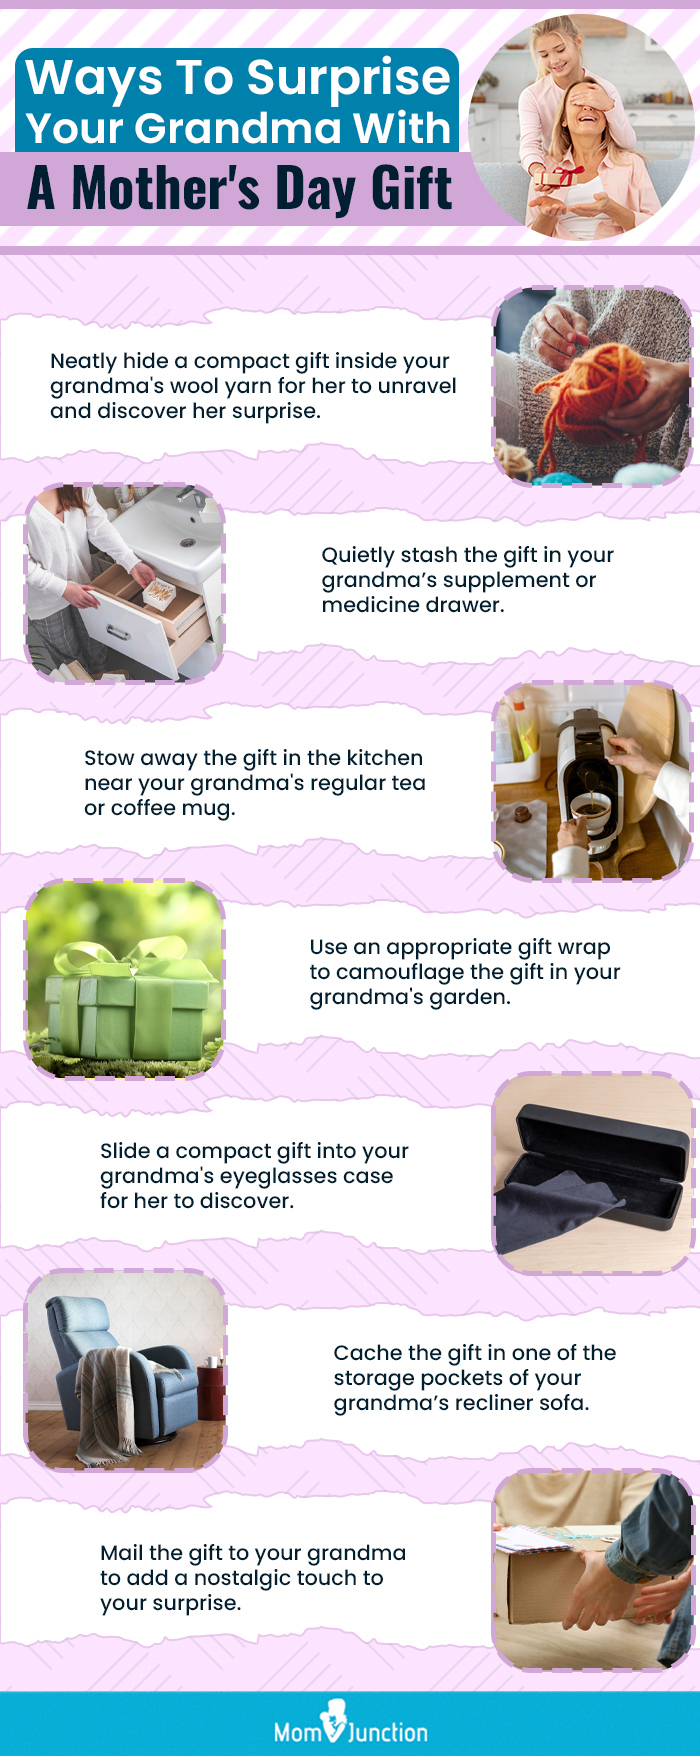 Ways To Surprise Your Grandma With A Mother_s Day Gift (infographic)